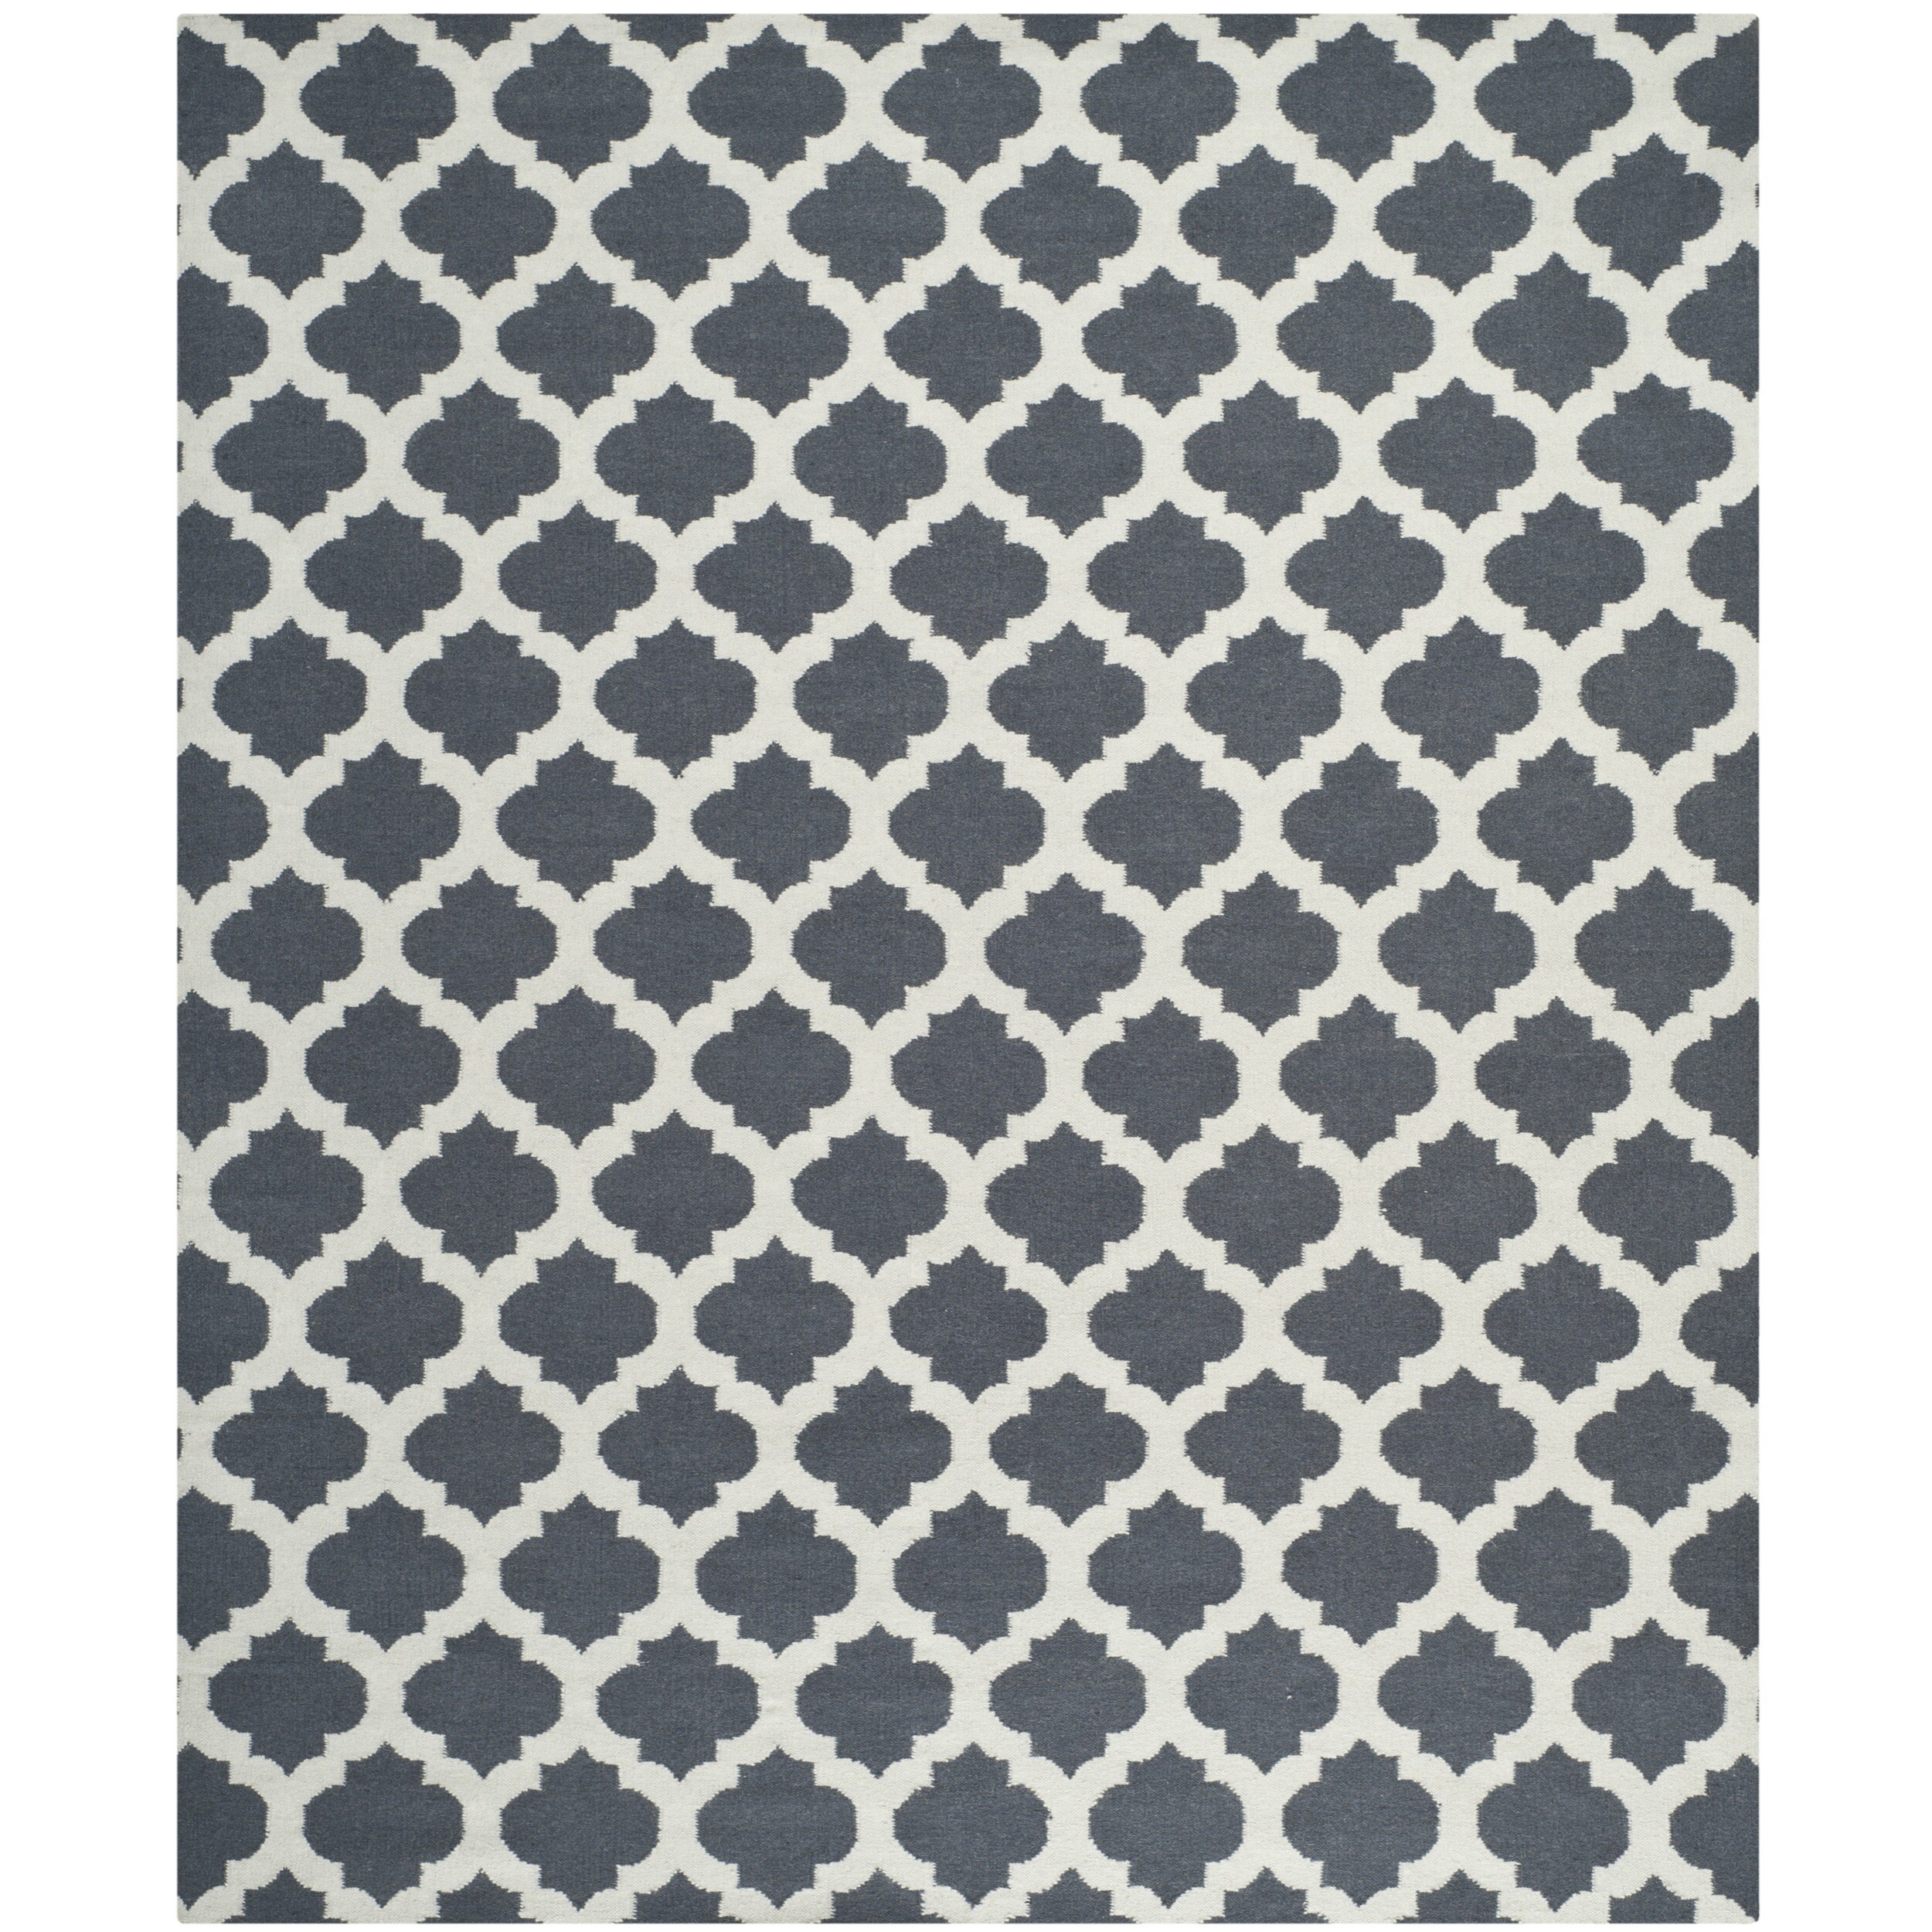 Safavieh Handwoven Transitional Moroccan Dhurrie Blue Wool Rug (6 X 9)